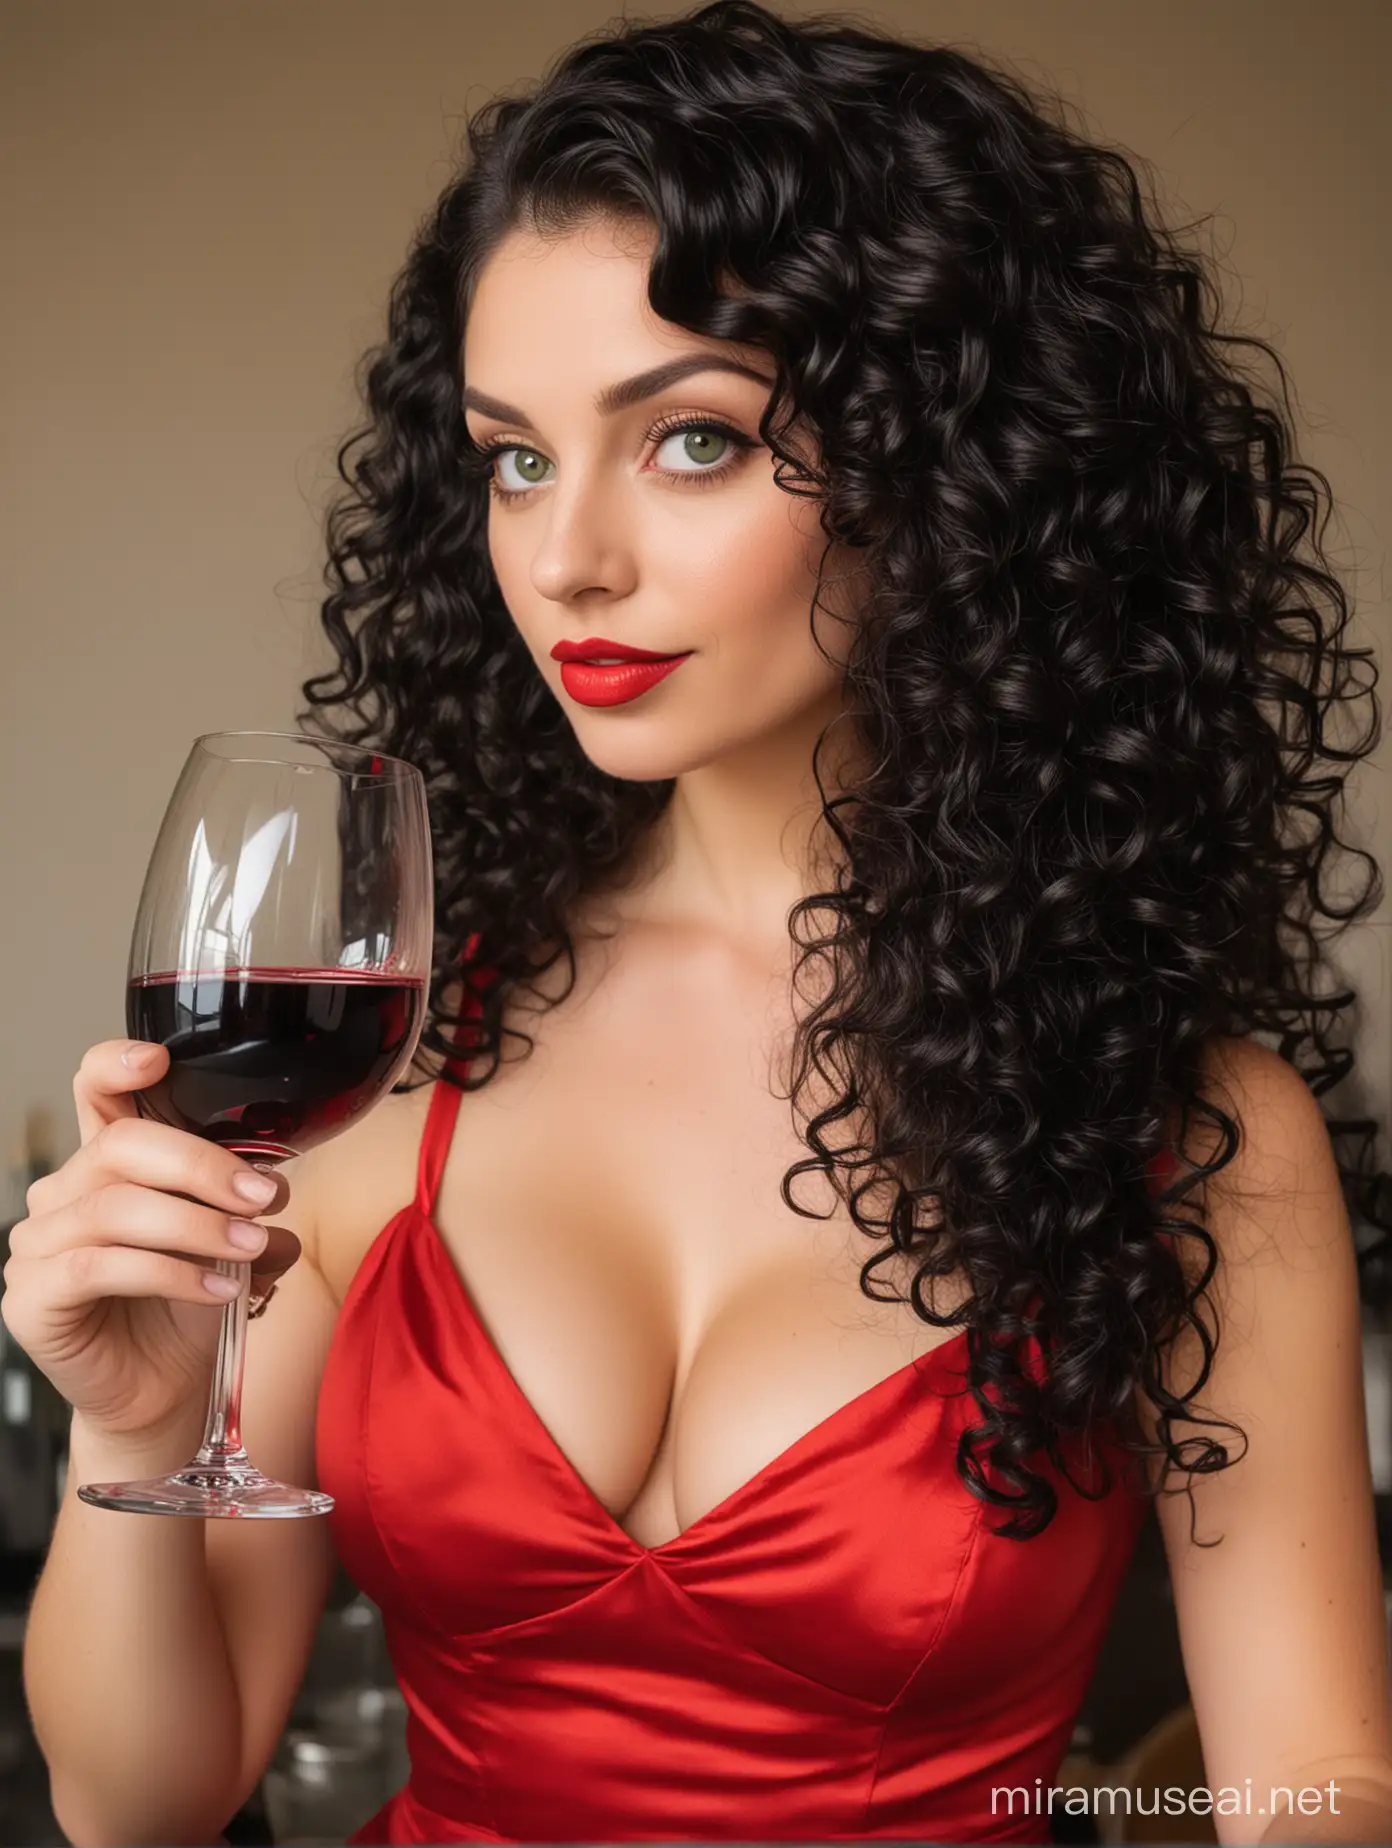 a woman with green eyes and a long black curly hair and red lipstick, she's wearing a red dress with tail and is holding a glass of wine, the imagem shows from her head until her shoes.